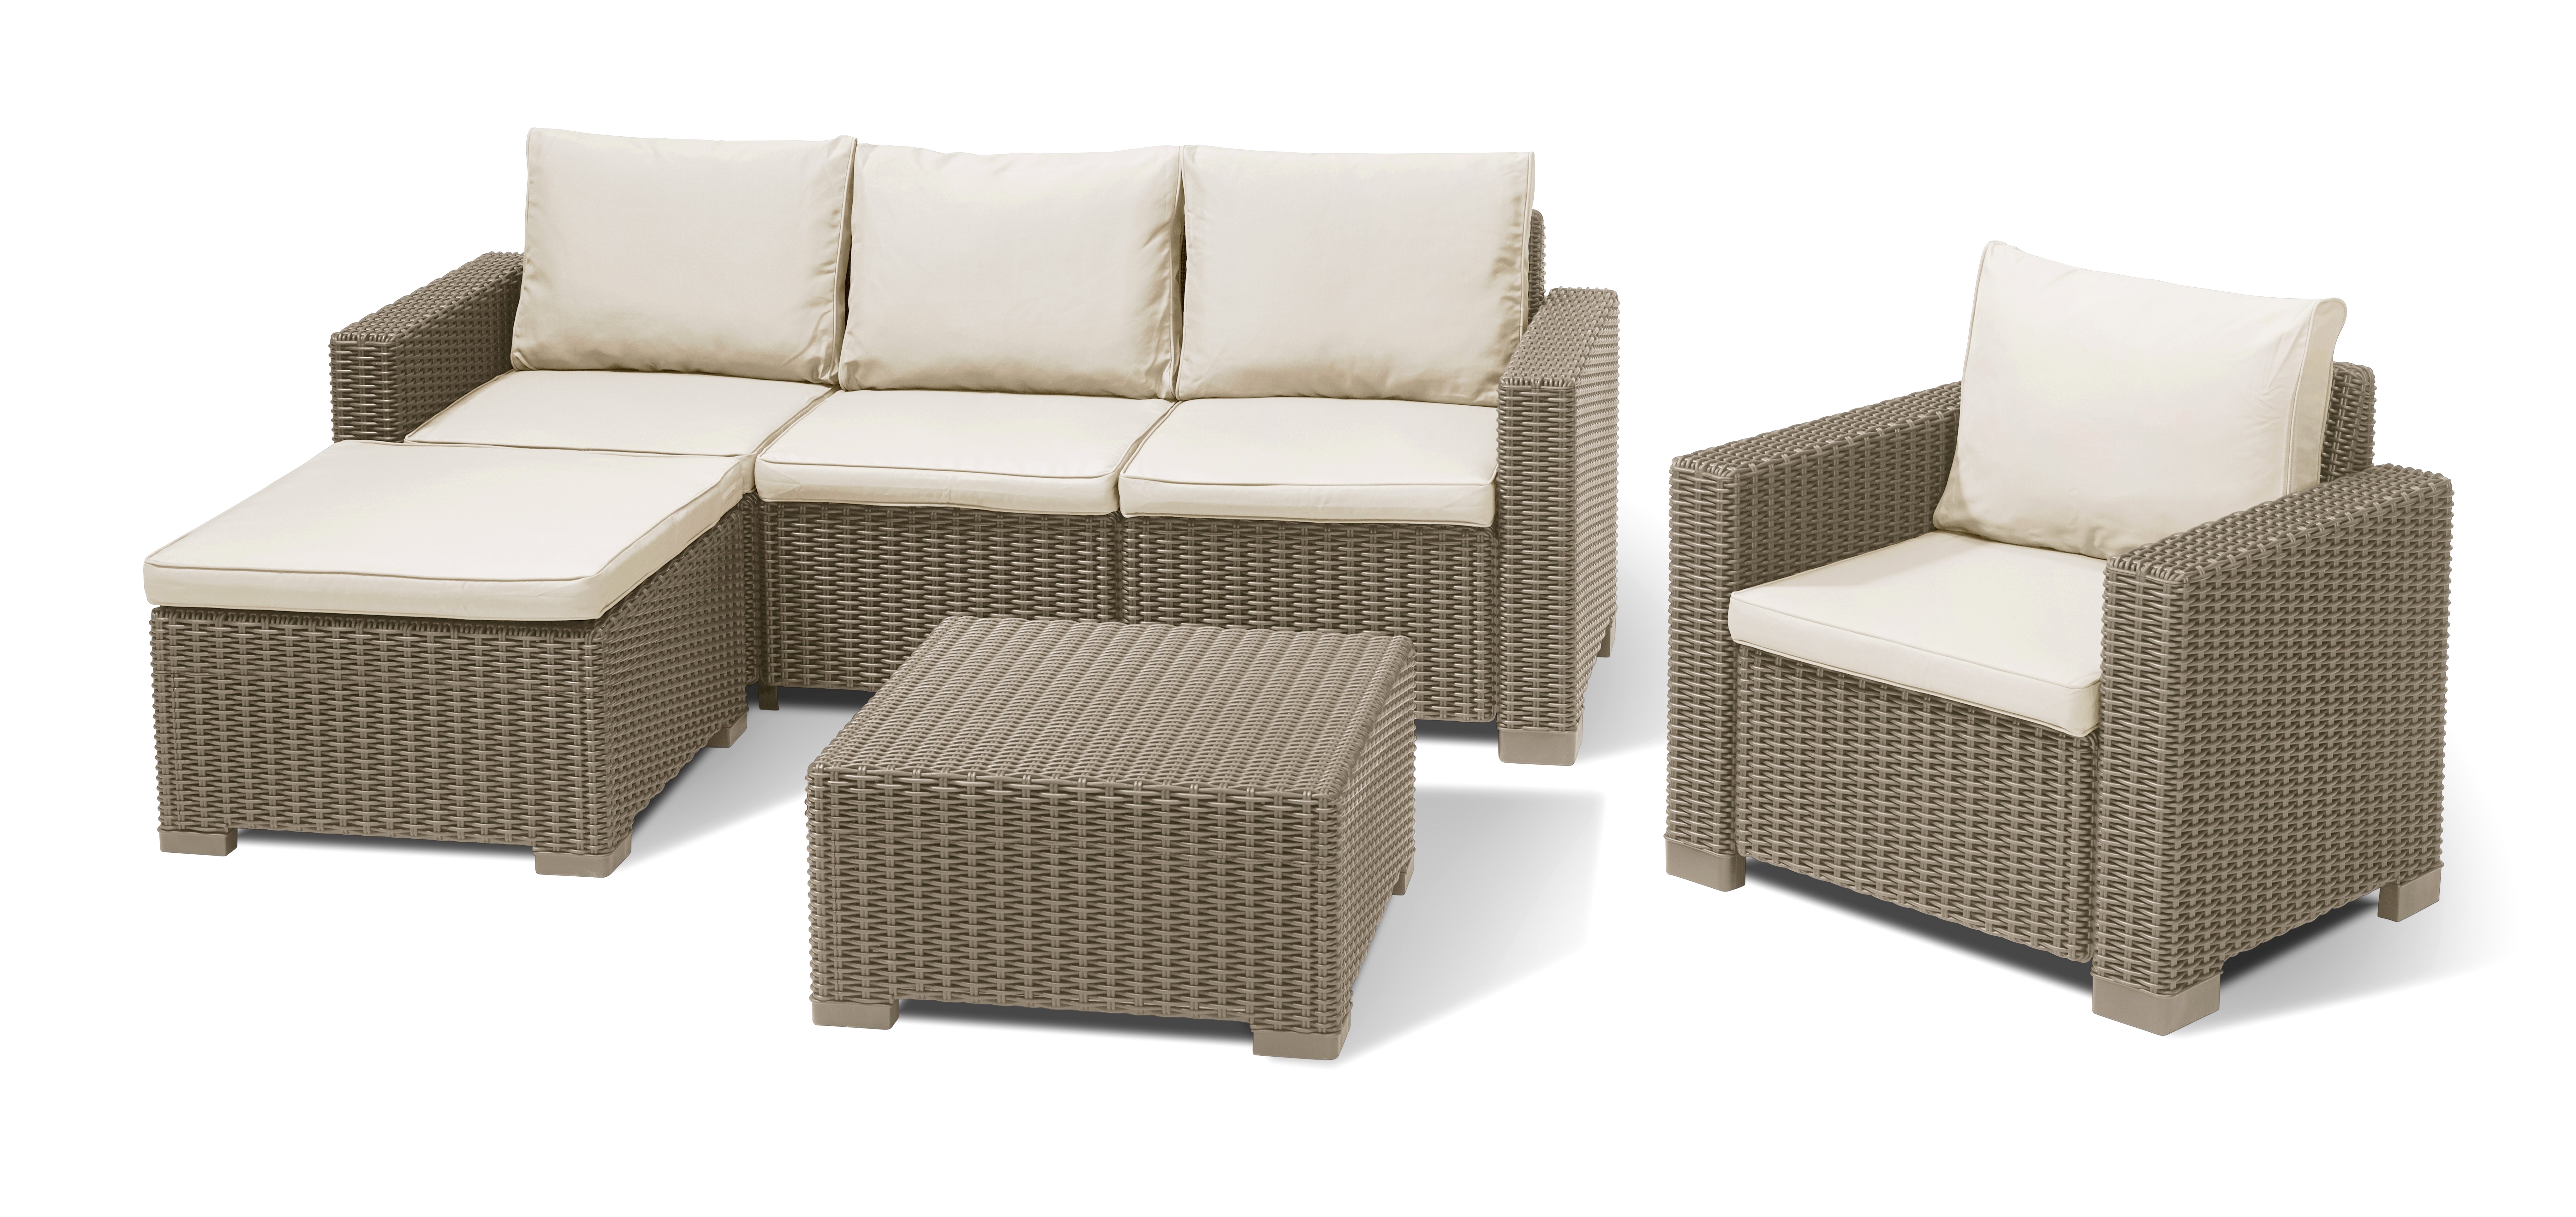 big coffee tables for sale Collection Big sofa Leder Patio sofas Awesome Wicker Outdoor sofa